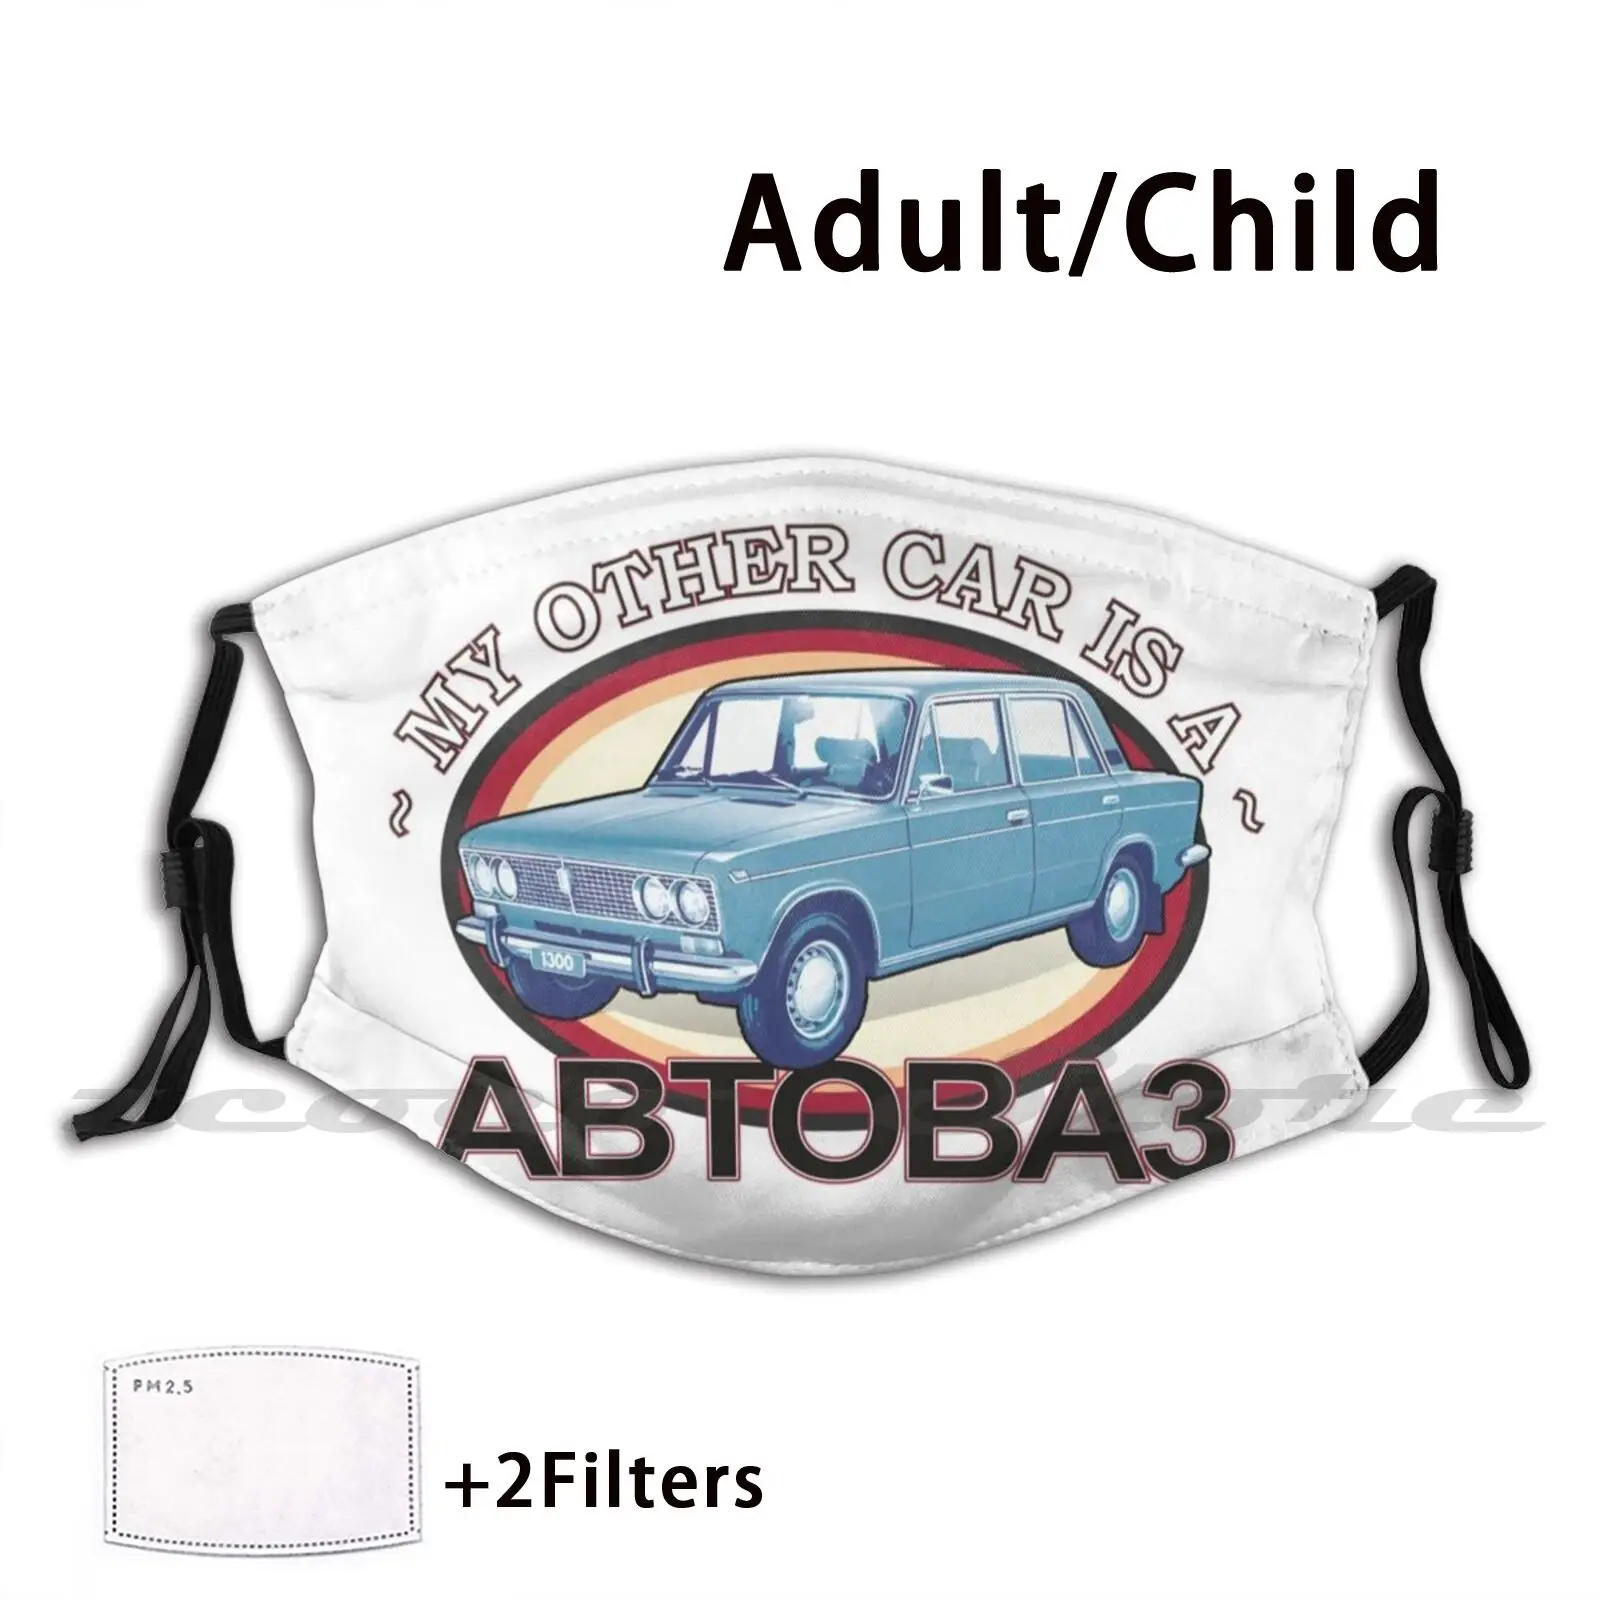 

My Other Car Is A Avtovaz Custom Pattern Washable Filter Pm2.5 Adult Kids Mask Off Road Car Geeky Funny 4X4 Russian Vaz Autovaz